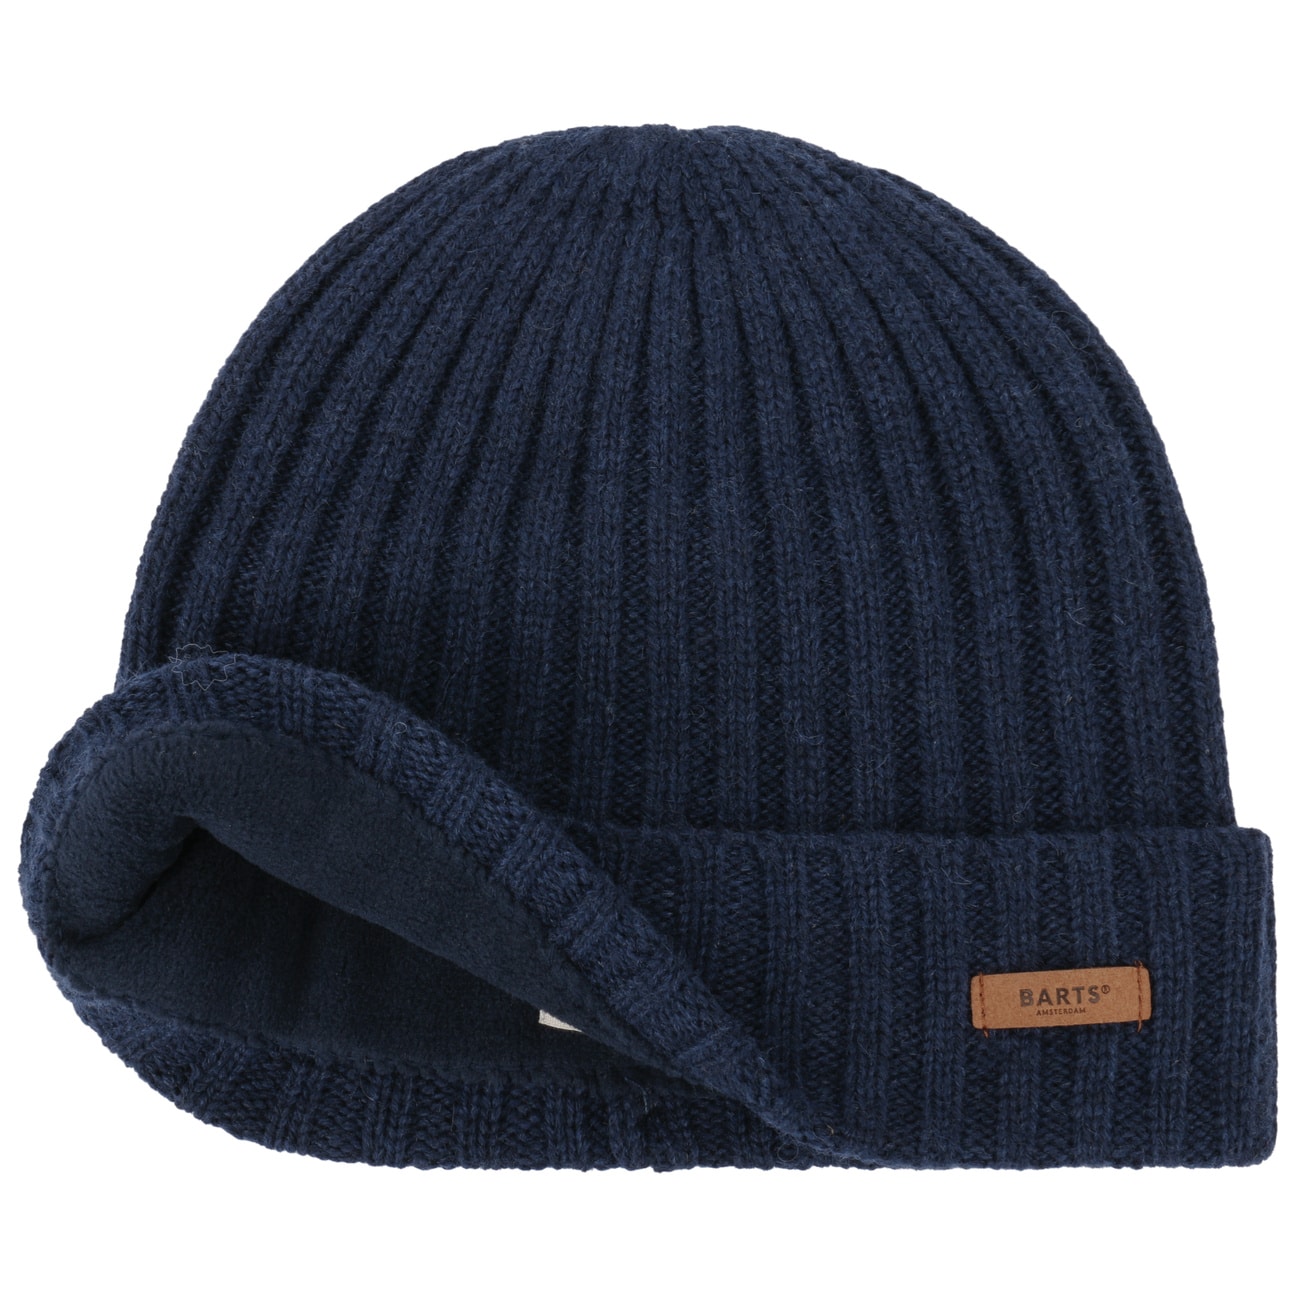 Haakon Beanie Hat 32,95 € by - Barts with Cuff